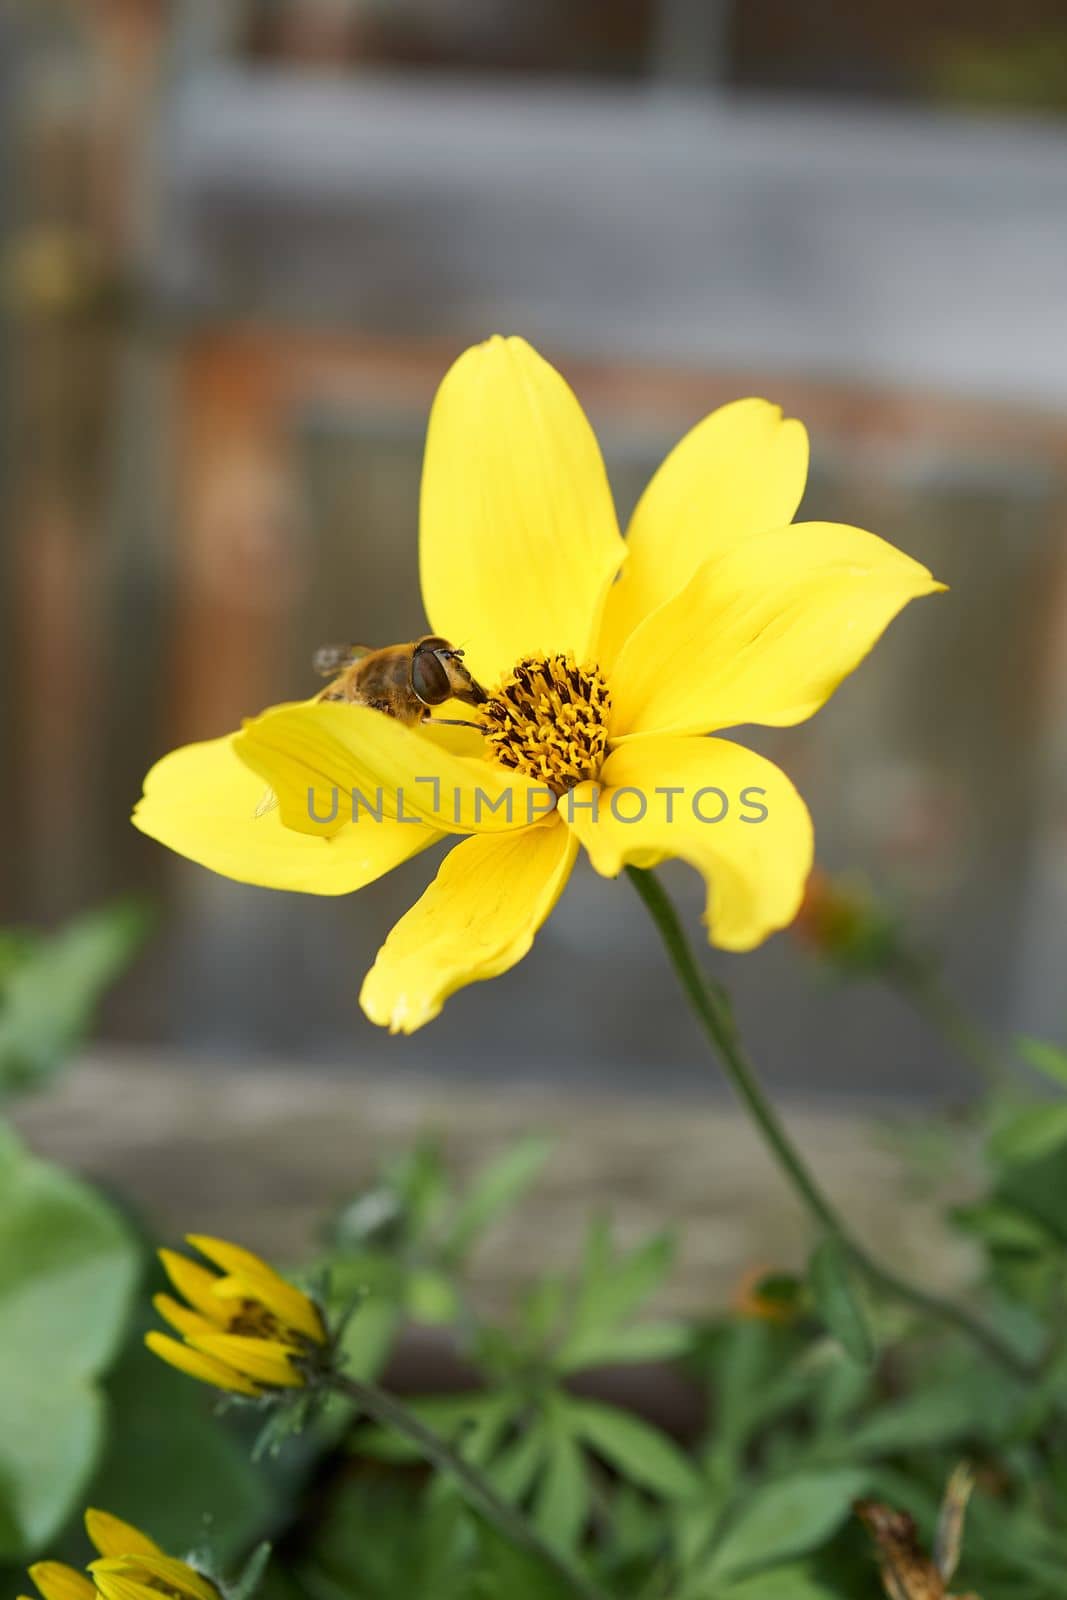 On a garden flower blooming with yellow leaves, a diligent bee supplies itself with a portion of pollen.